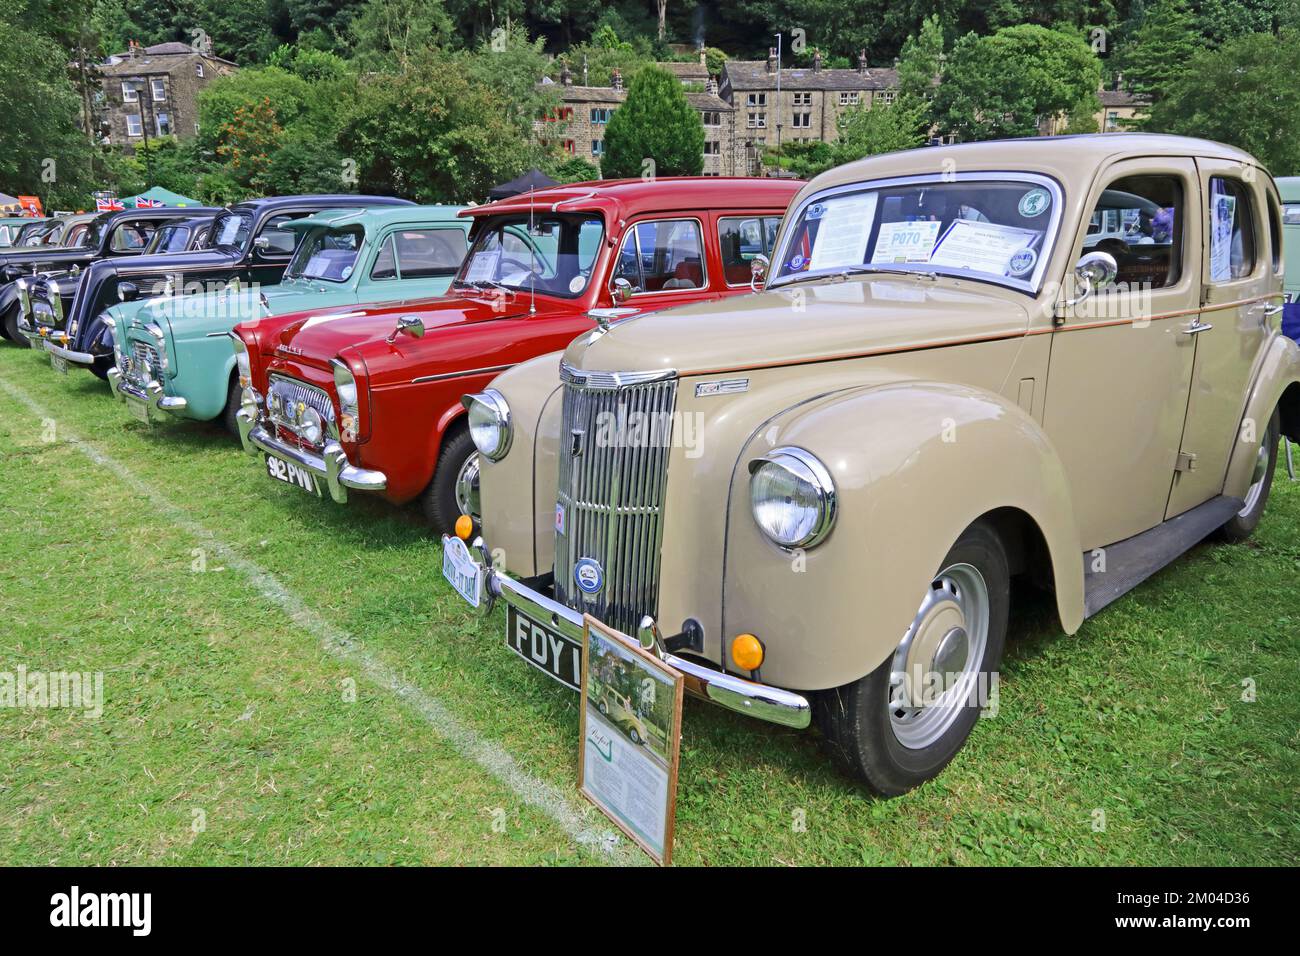 Row of 1950's Ford saloon cars at car show Stock Photo